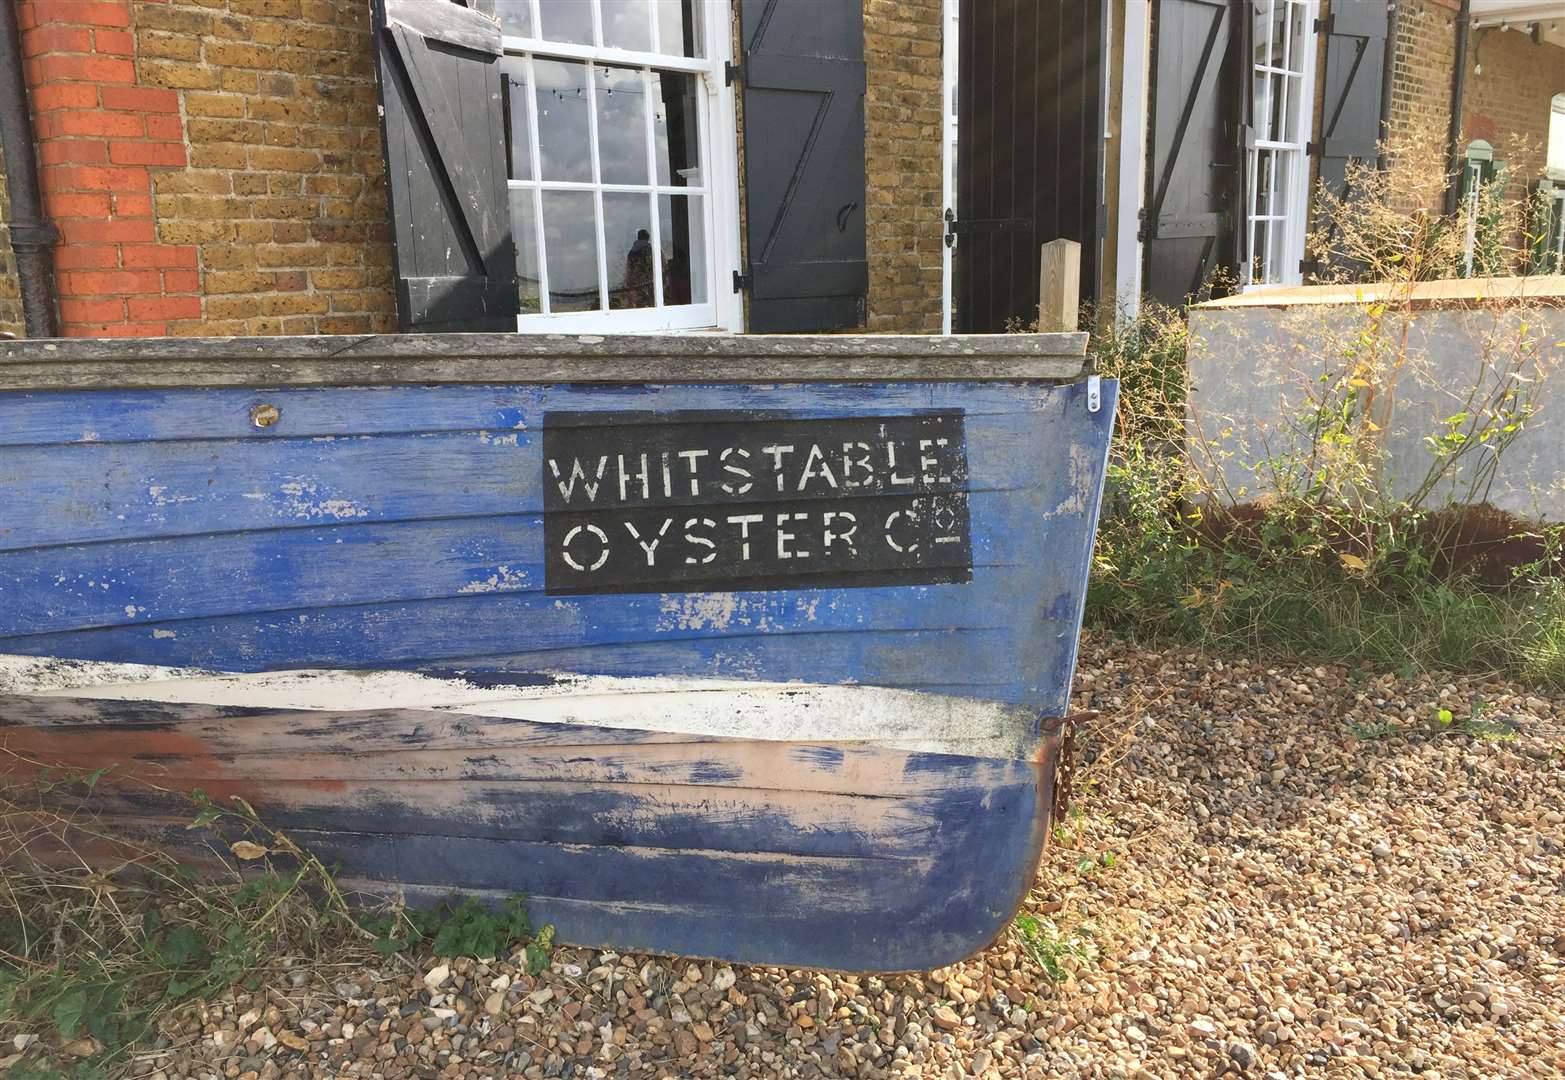 The Whitstable Oyster Fishery Company has won its latest appeal